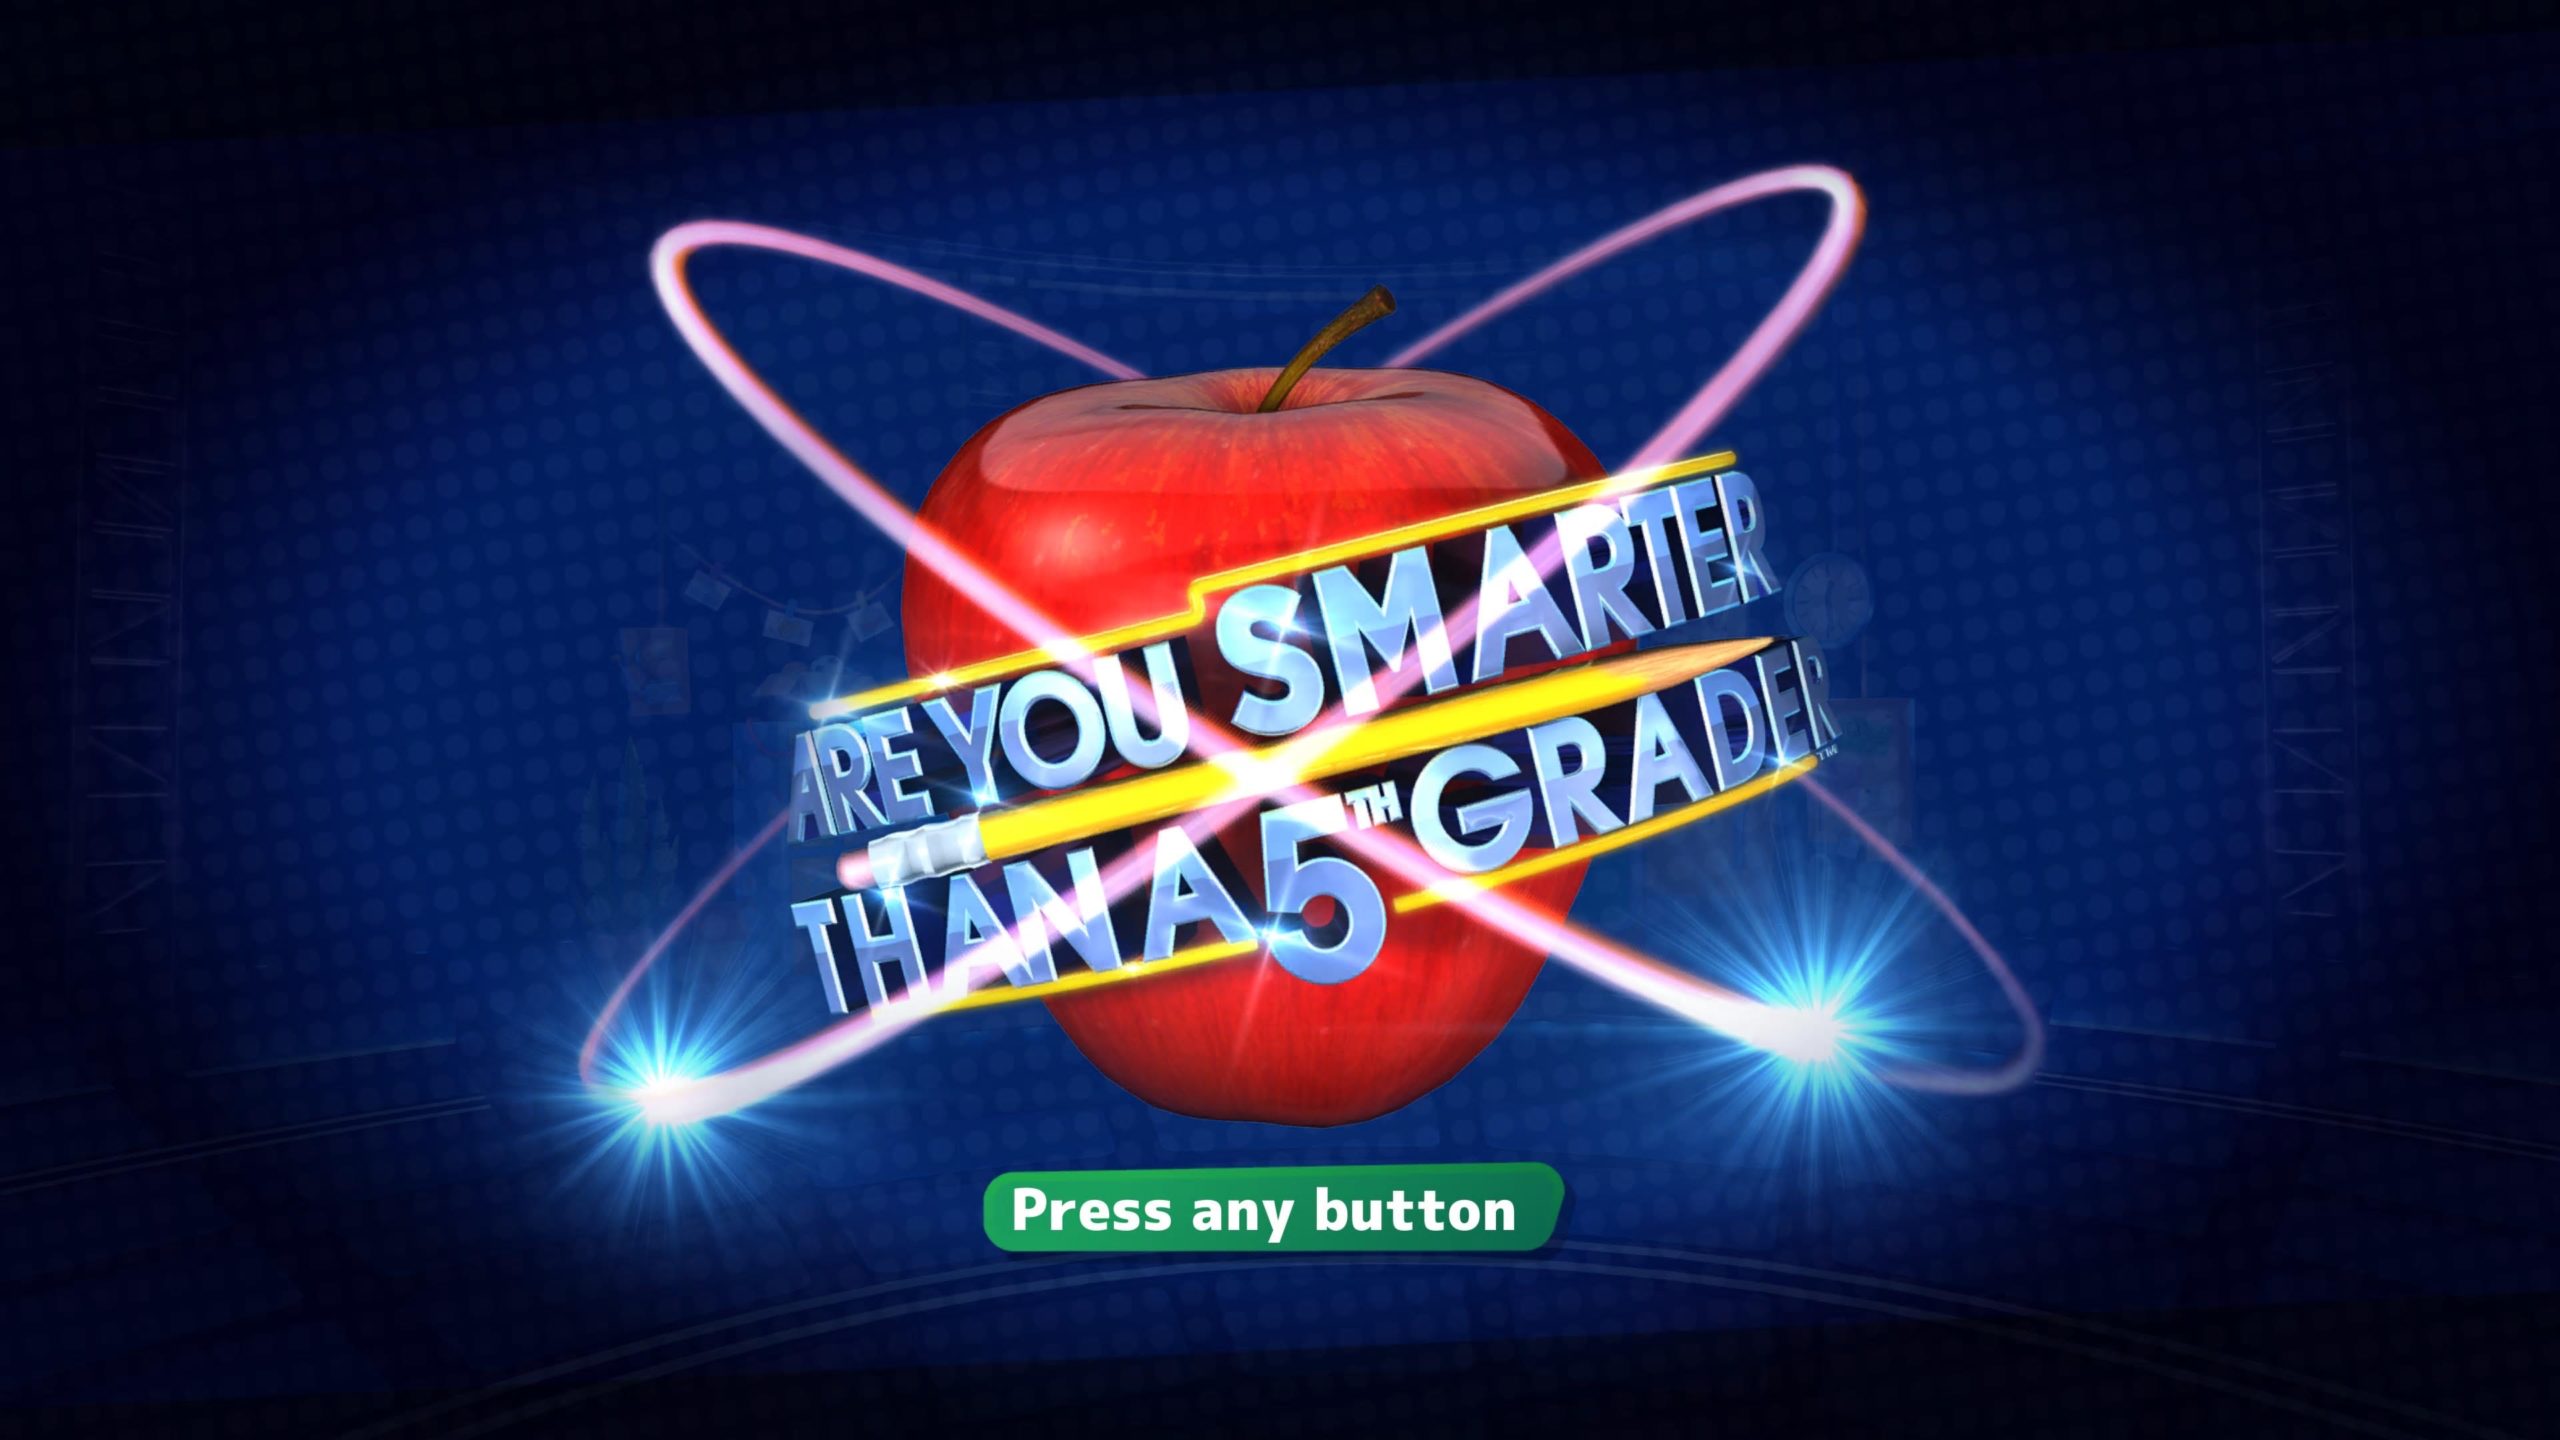 Are you Smarter than a 5th grader game time Xbox 360 обложка. Are you Smarter than a 5th grader? Show. Тайтлы 2022